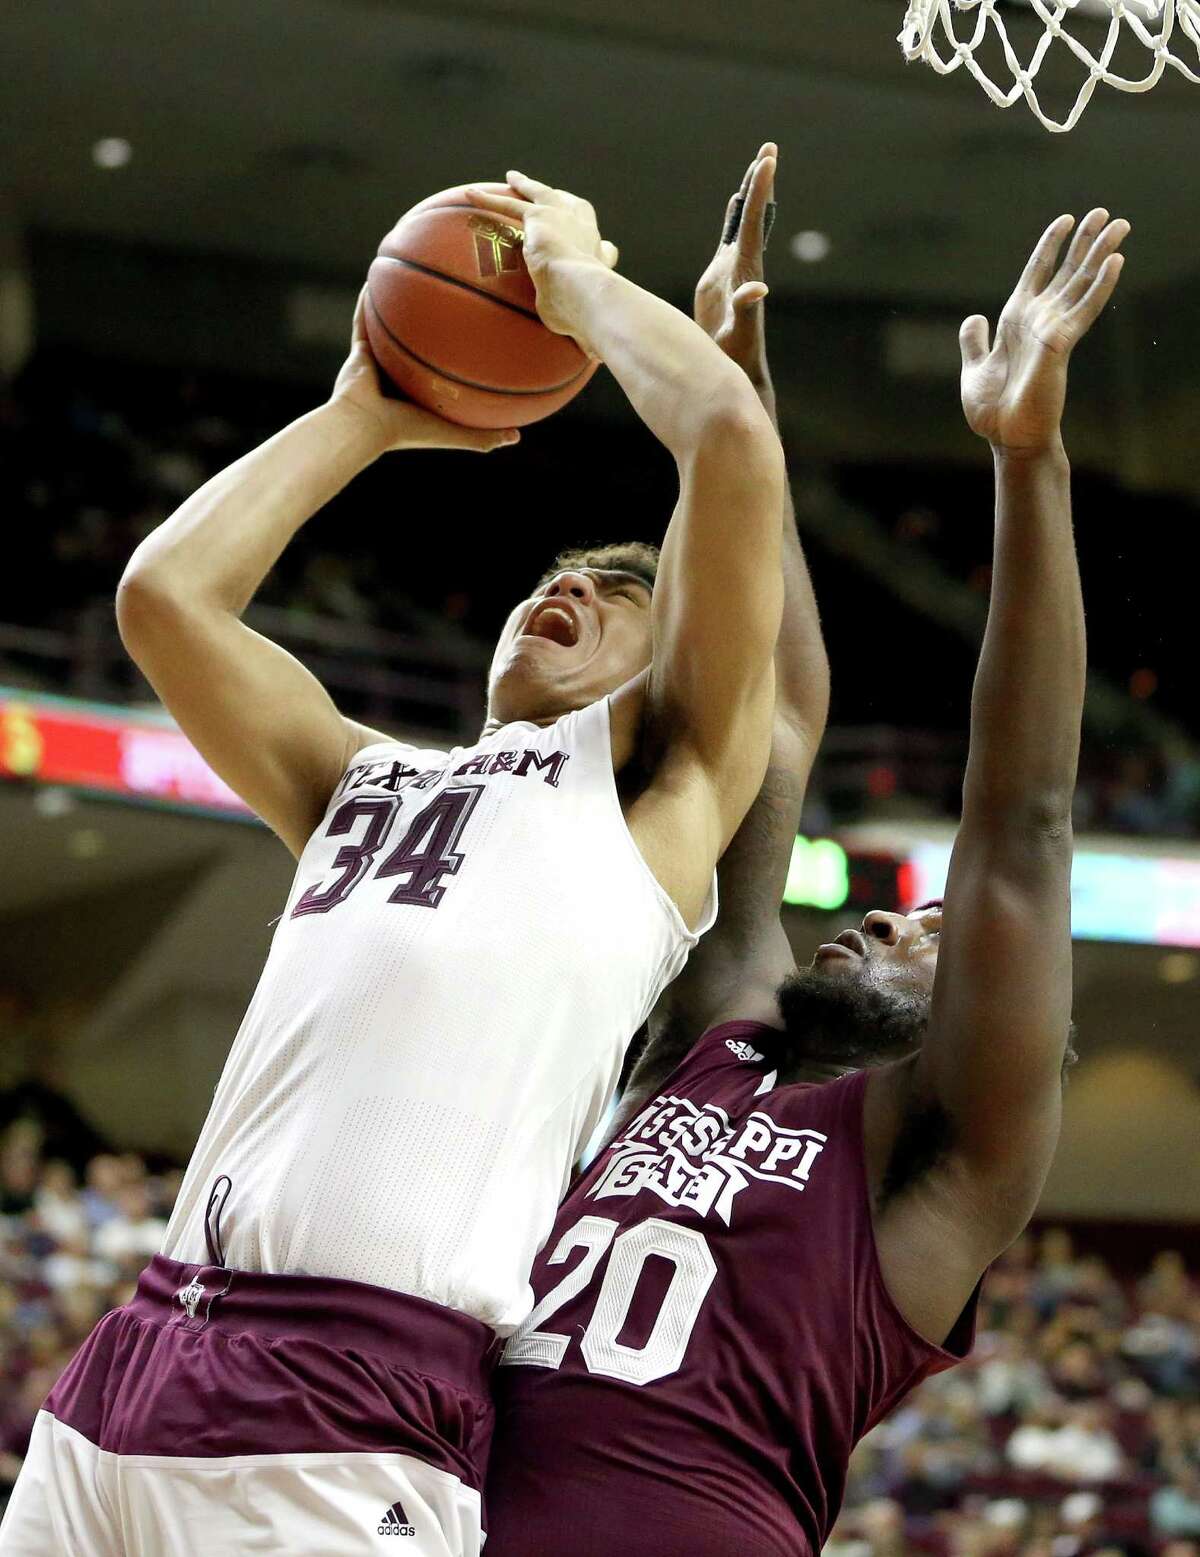 Texas A&M’s Tyler Davis, who had 15 points, shoots while being defended by Gavin Ware in the first half.